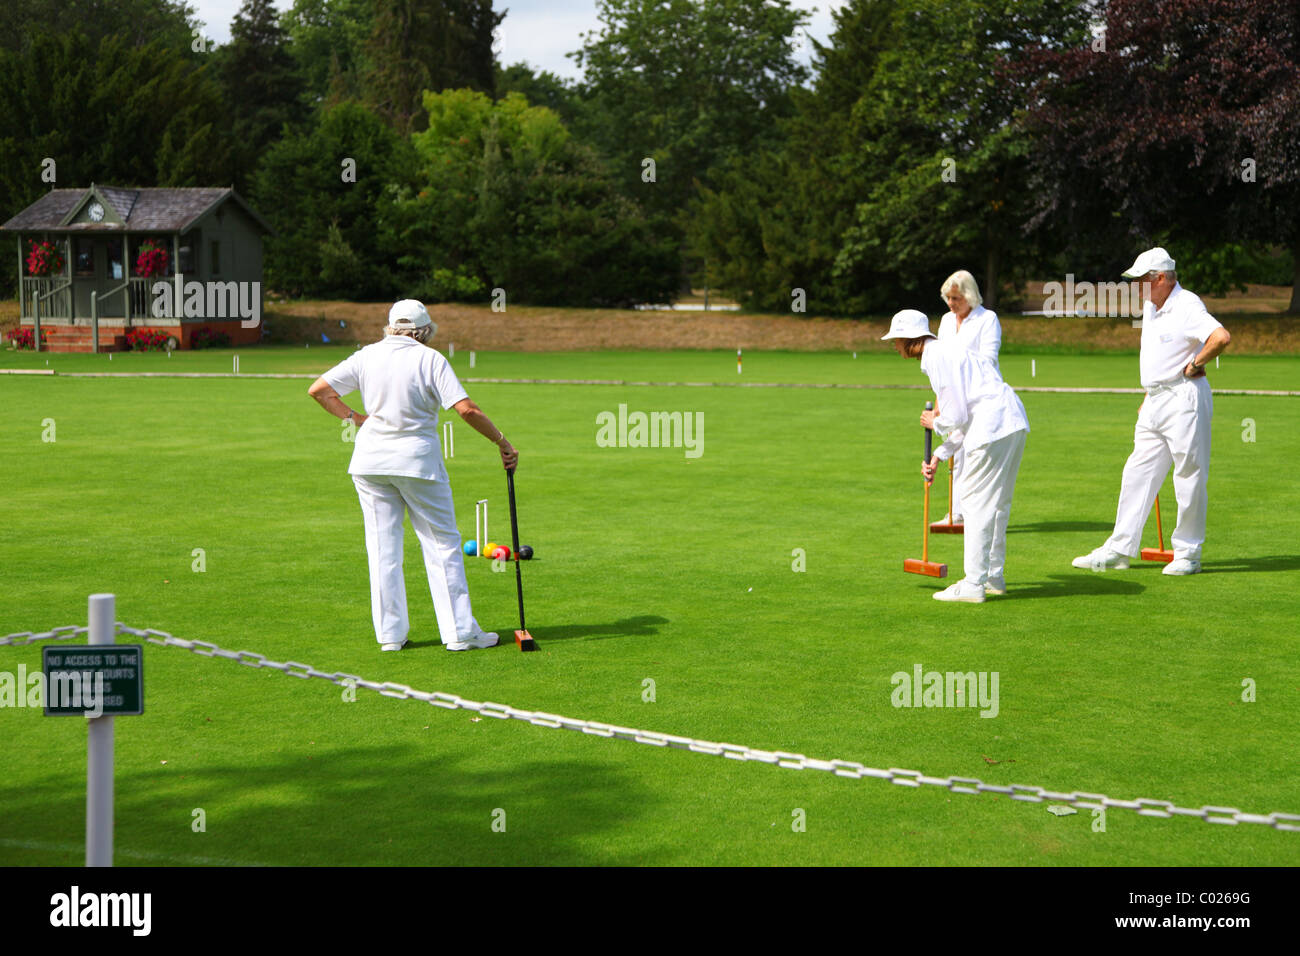 Village croquet players in rural England Stock Photo